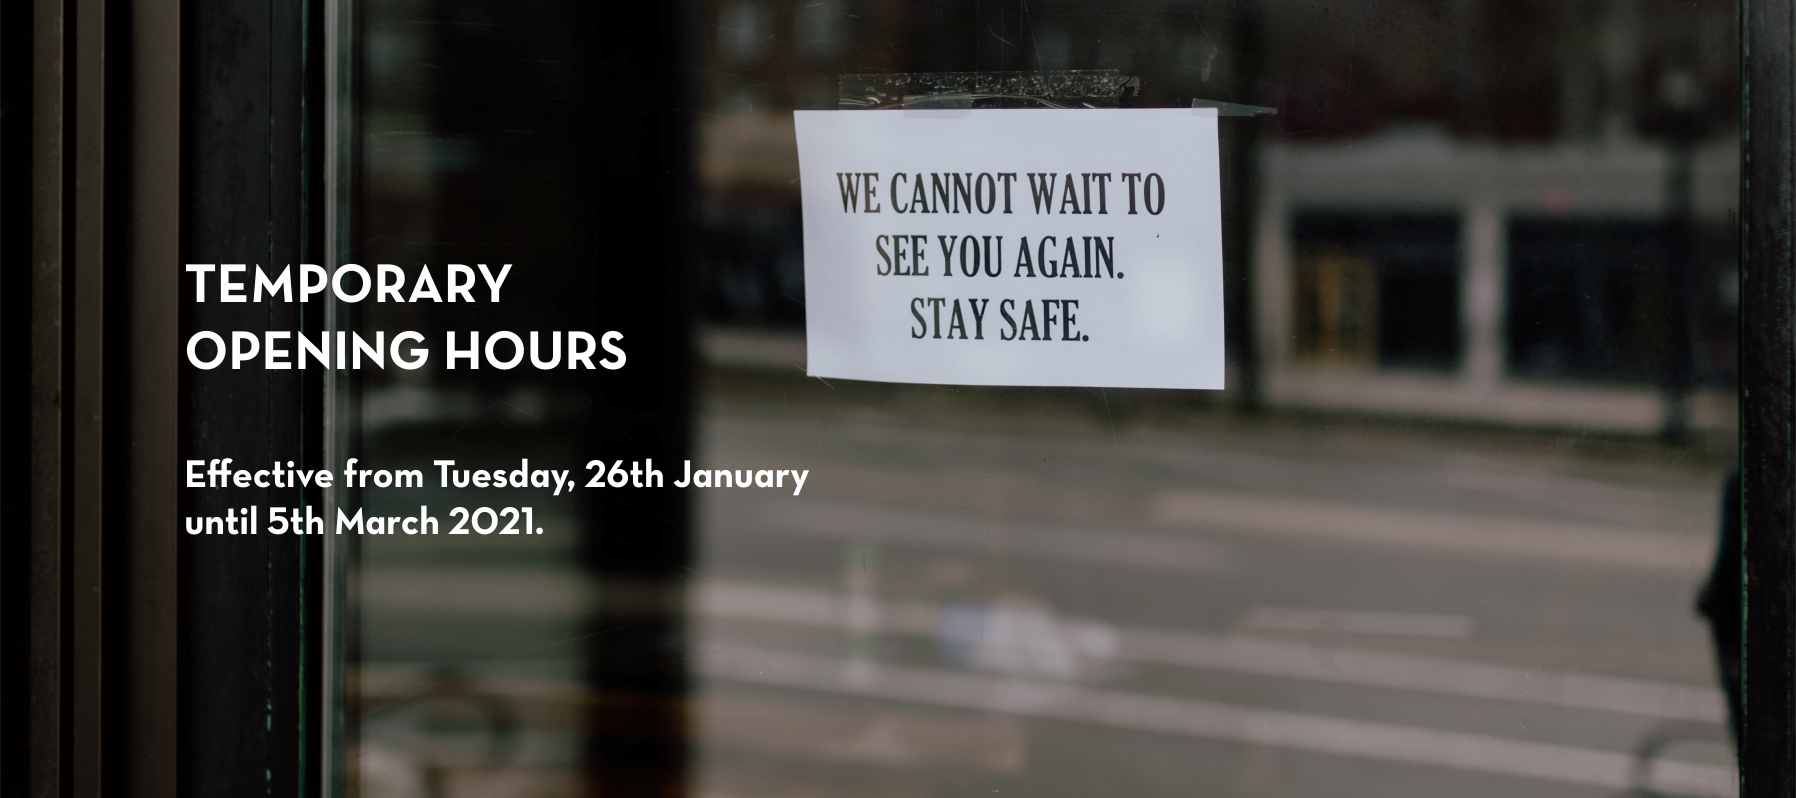 COVID19 Update - Temporary Opening Hours until 5 March